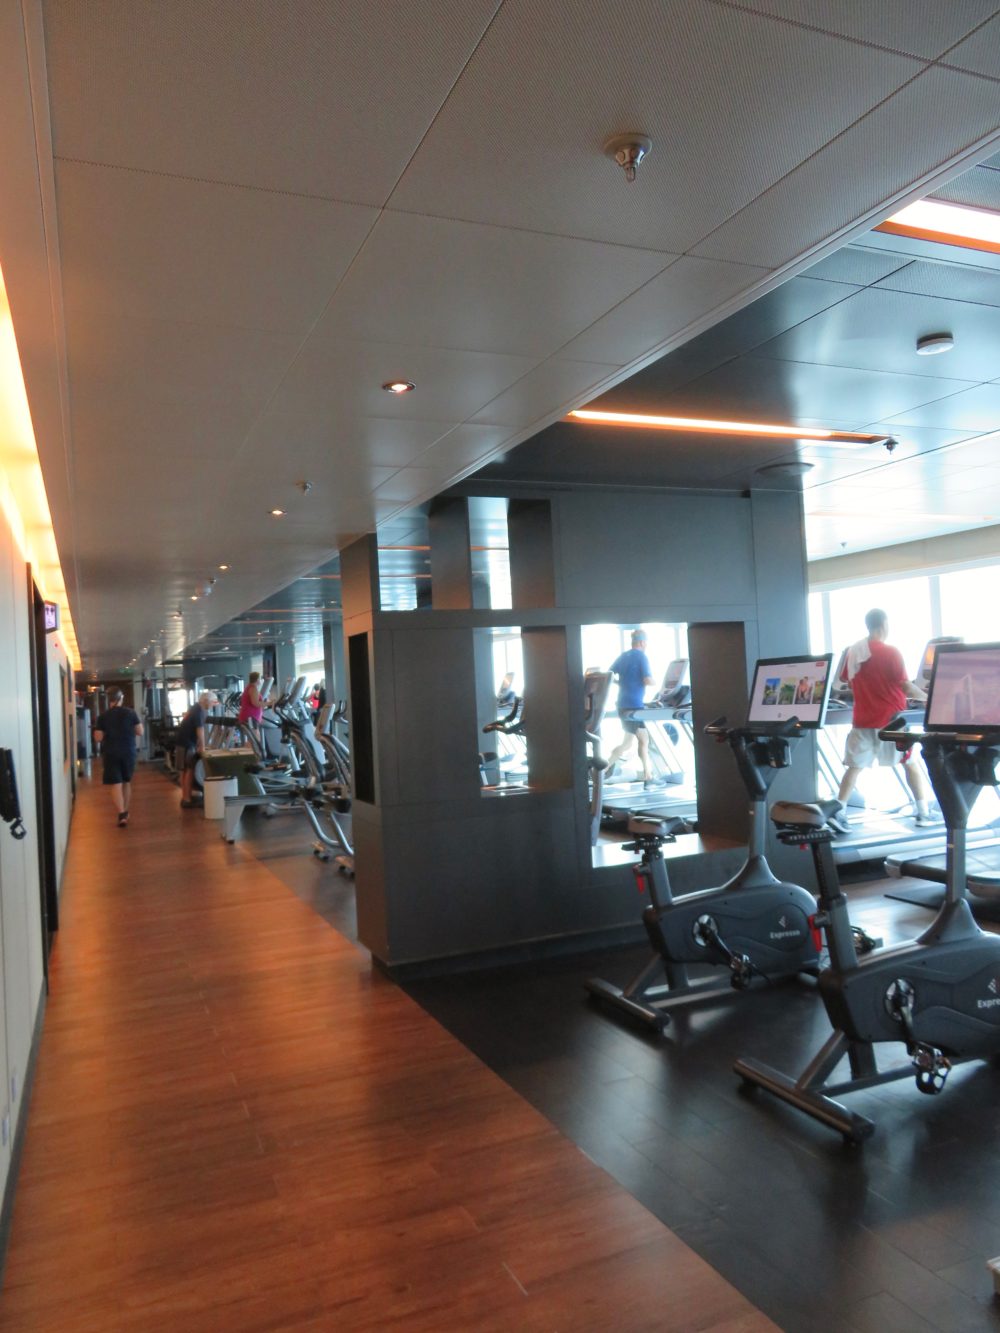 Interioe photo of cruise ship fitness center including stationary bikes, weights, tread mills |staying healthy on a cruise ship|